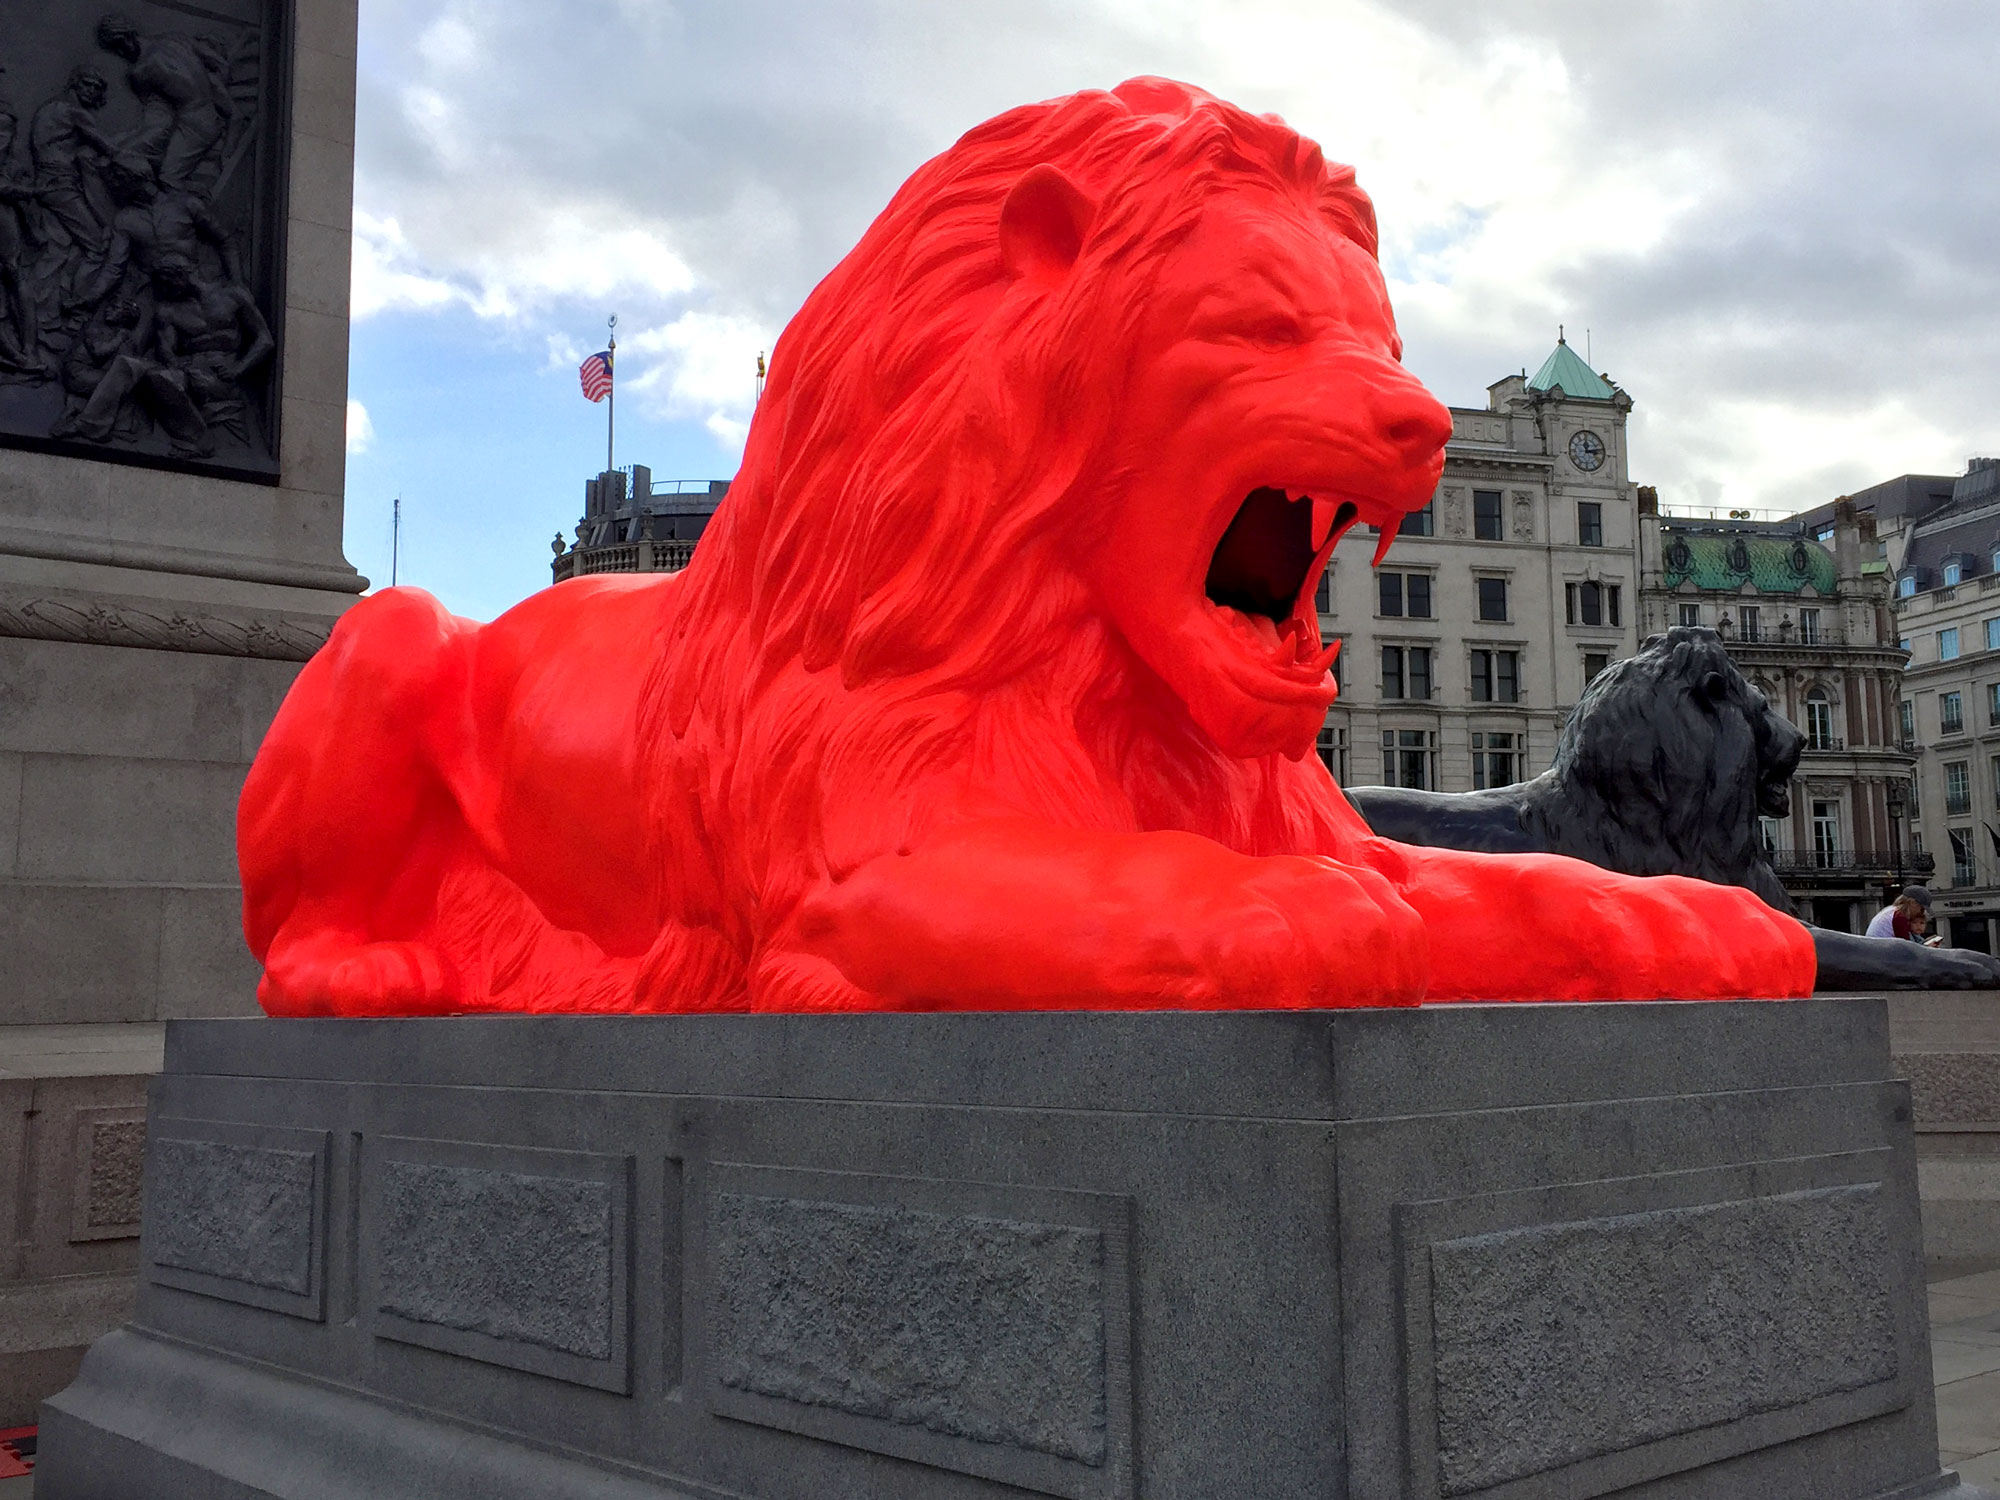 On a grey stone plinth sits a reclining line sculpture, painted in fluorescent red paint. Behind it a similar black lion and behind that is a London skyline.